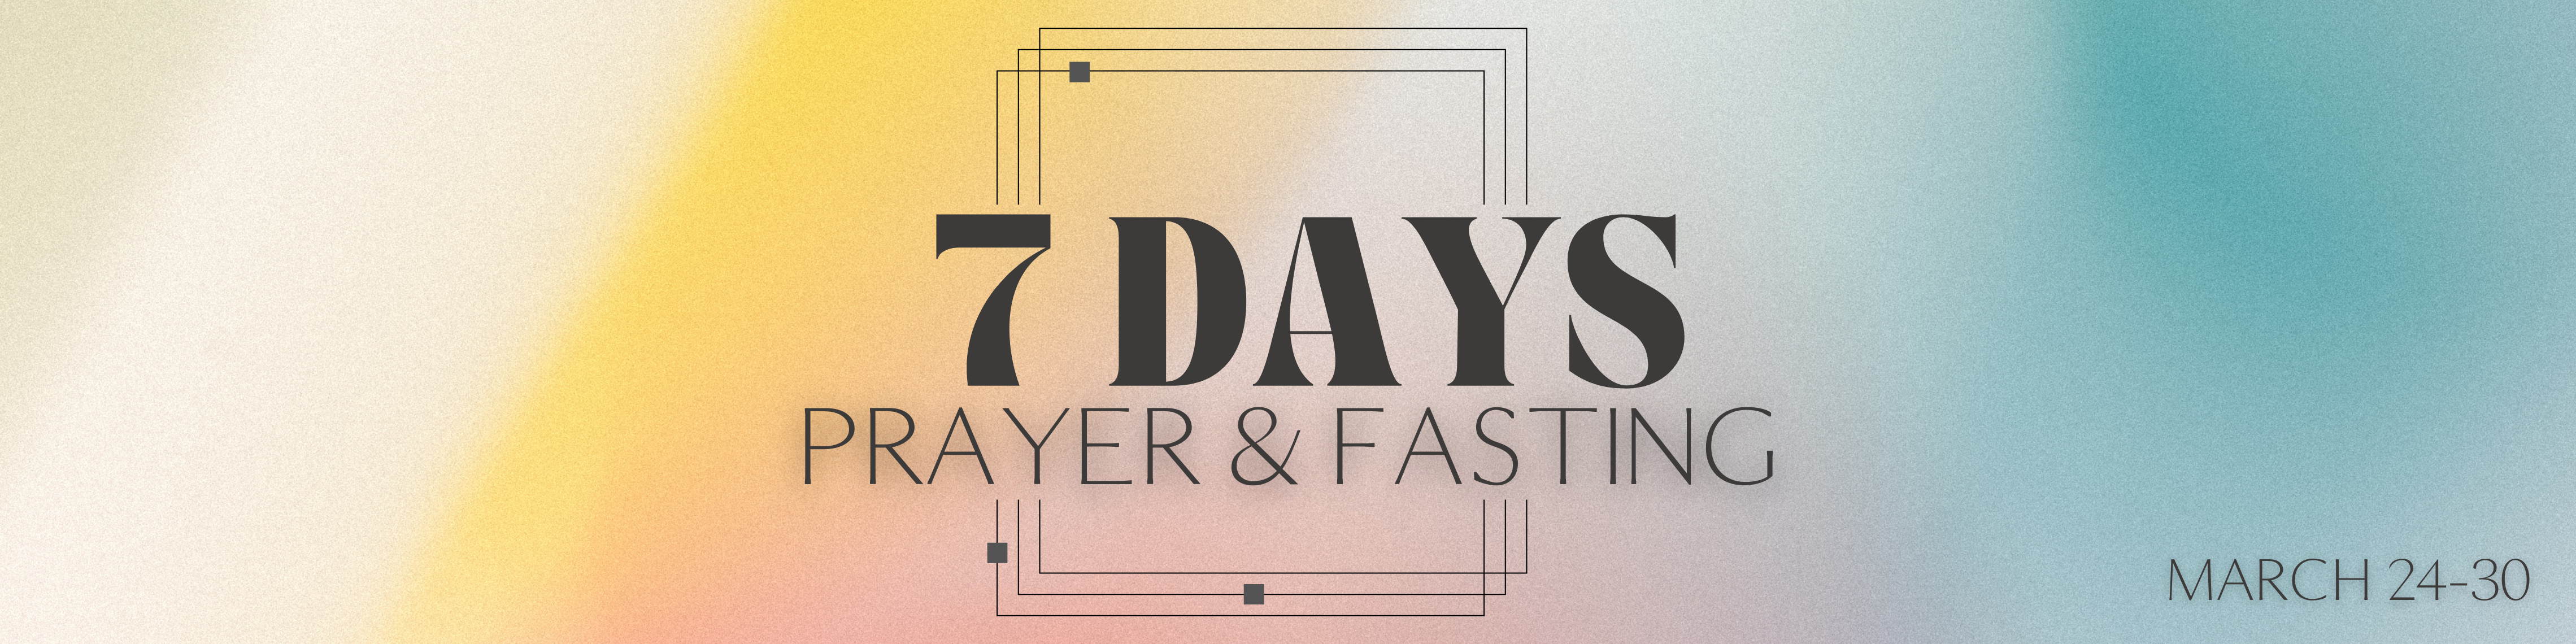 7_Days_of_Prayer_and_Fasting_1920_x_480_px_2.png